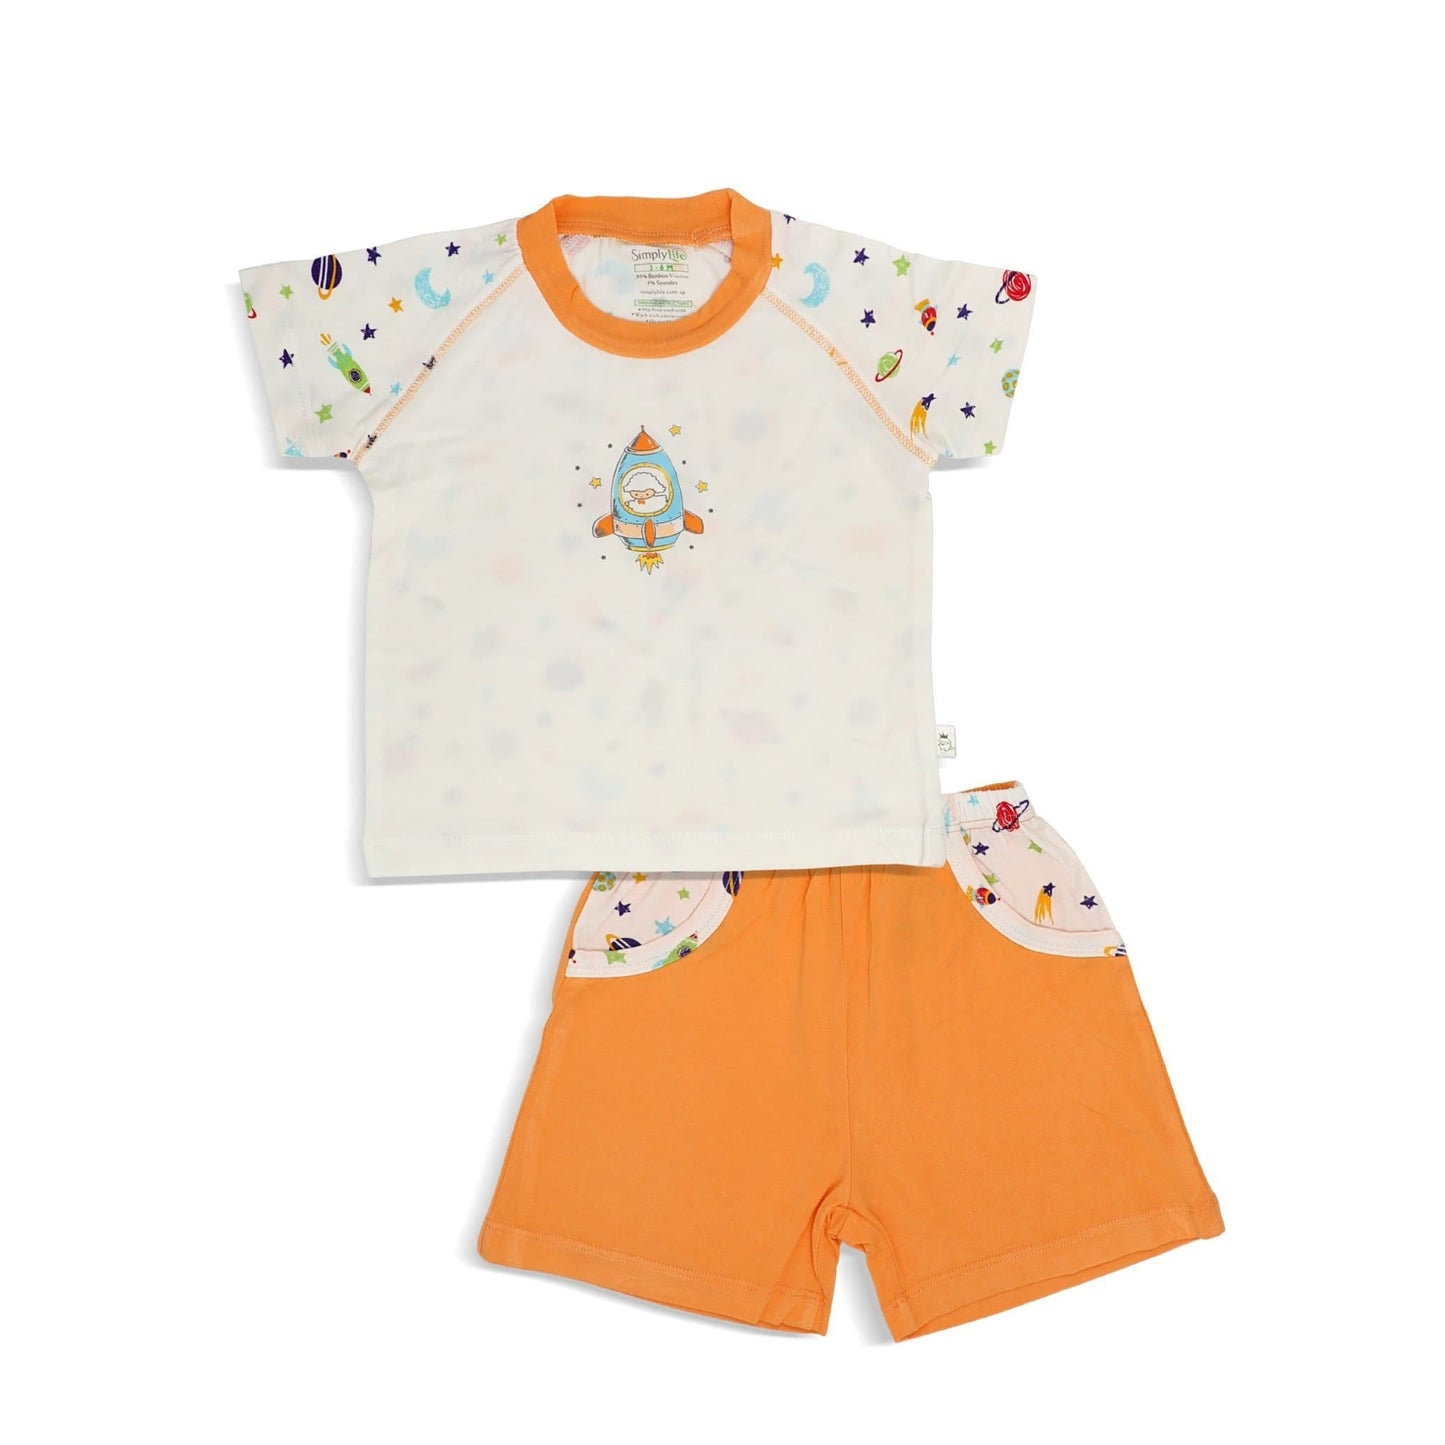 Spaceships - Shorts & Tee Set by simplylifebaby